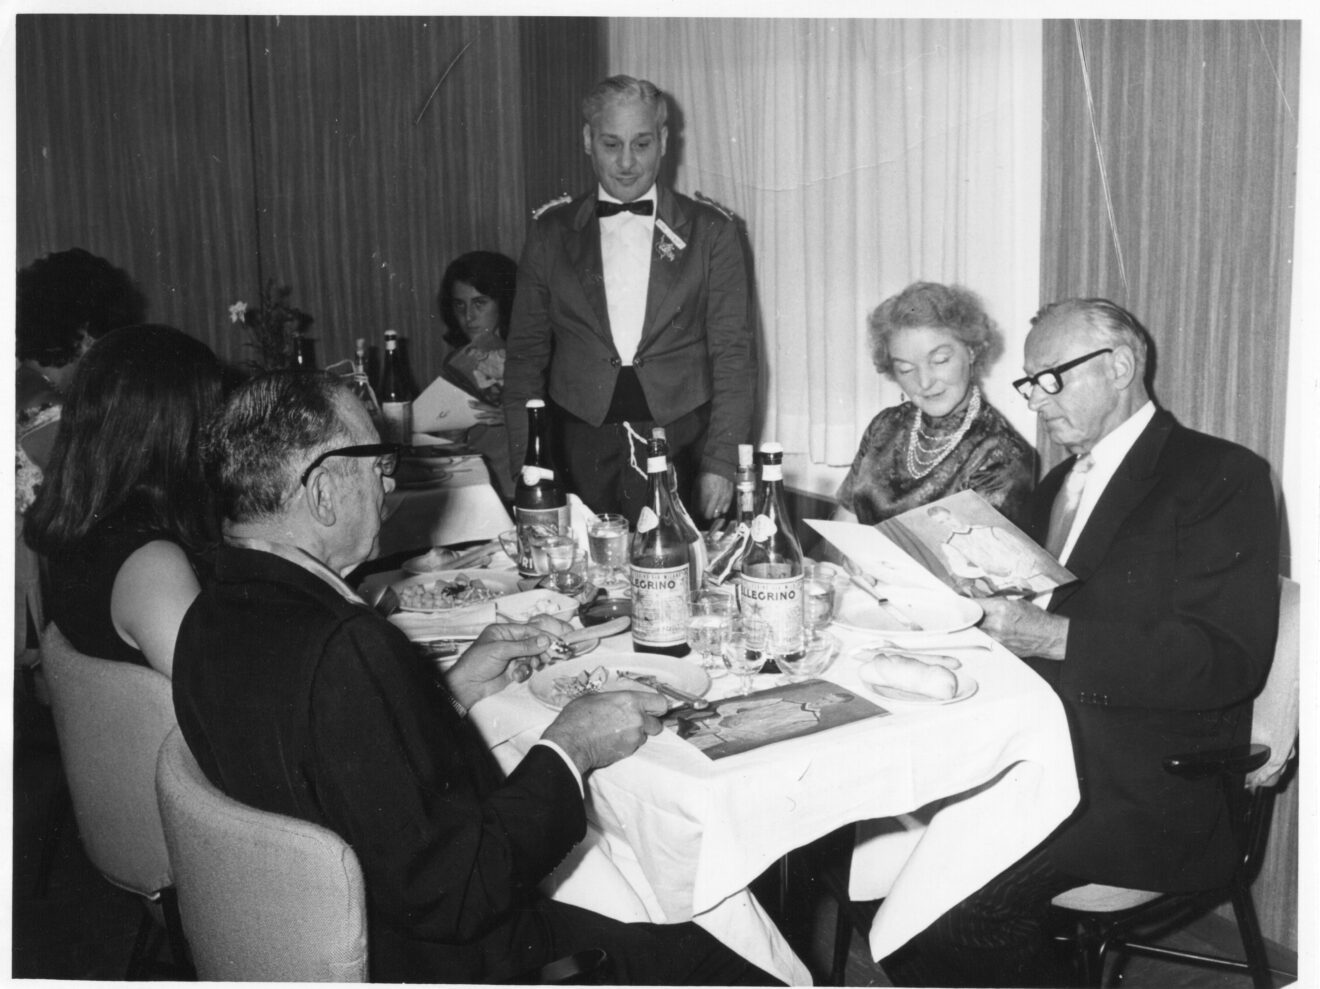 Ben Graham and his granddaughter dining on a Mediterranean/Black Sea cruise, 1967